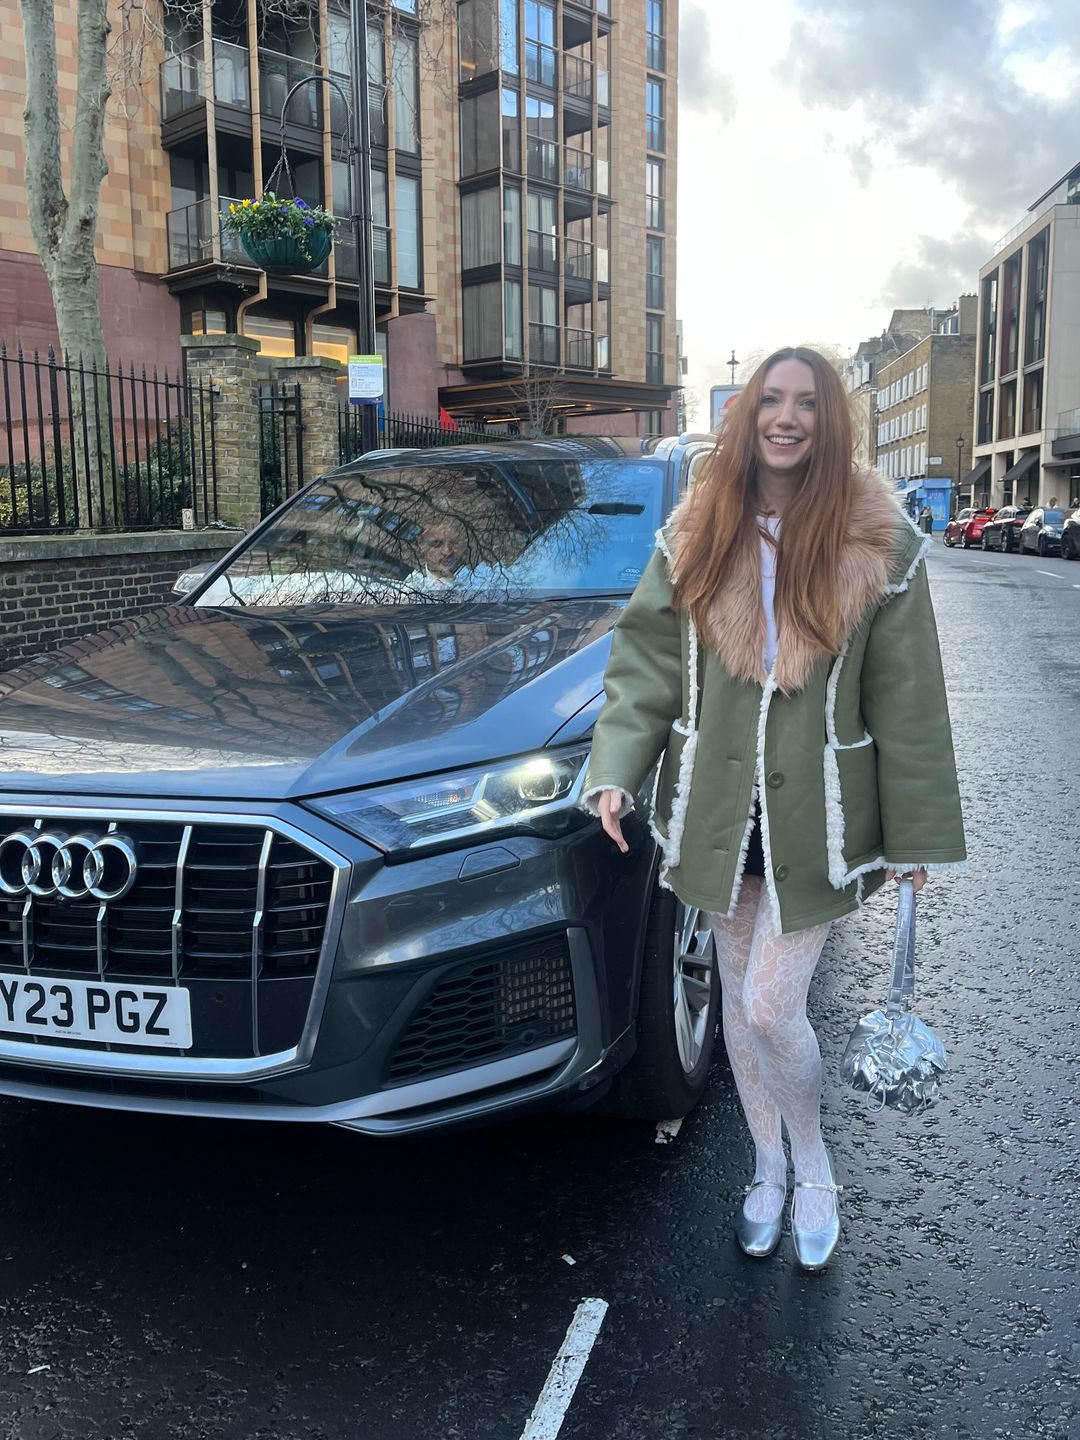 Clare Clare Pennington spotted at London Fashion Week next to and Audi Q7 car